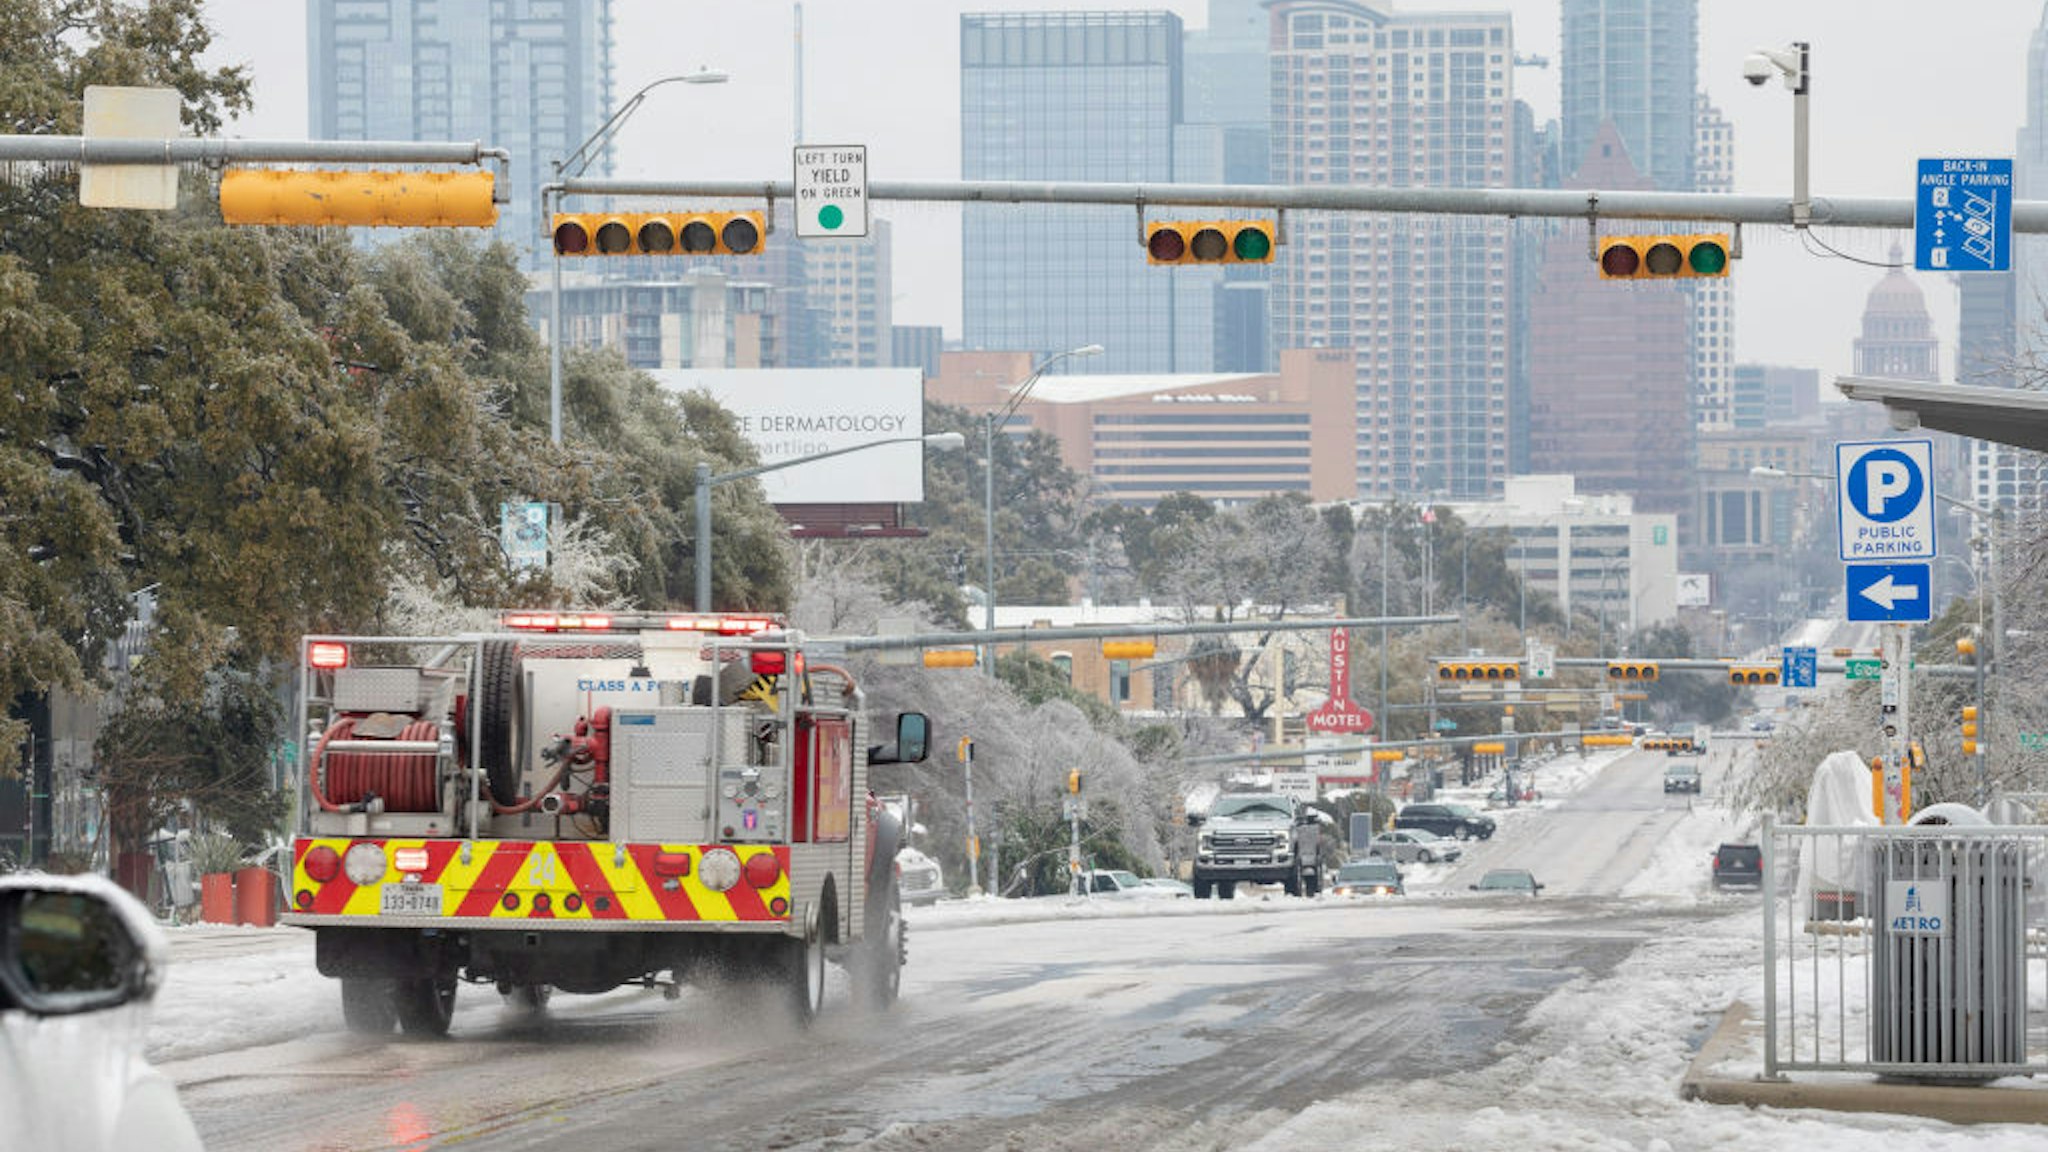 A firetruck drives down Congress Avenue in Austin, Texas, U.S., on Wednesday, Feb. 17, 2021. The crisis that has knocked out power for days to millions of homes and businesses in Texas and across the central U.S. is getting worse, with blackouts expected to last until at least Thursday. Photographer: Thomas Ryan Allison/Bloomberg via Getty Images